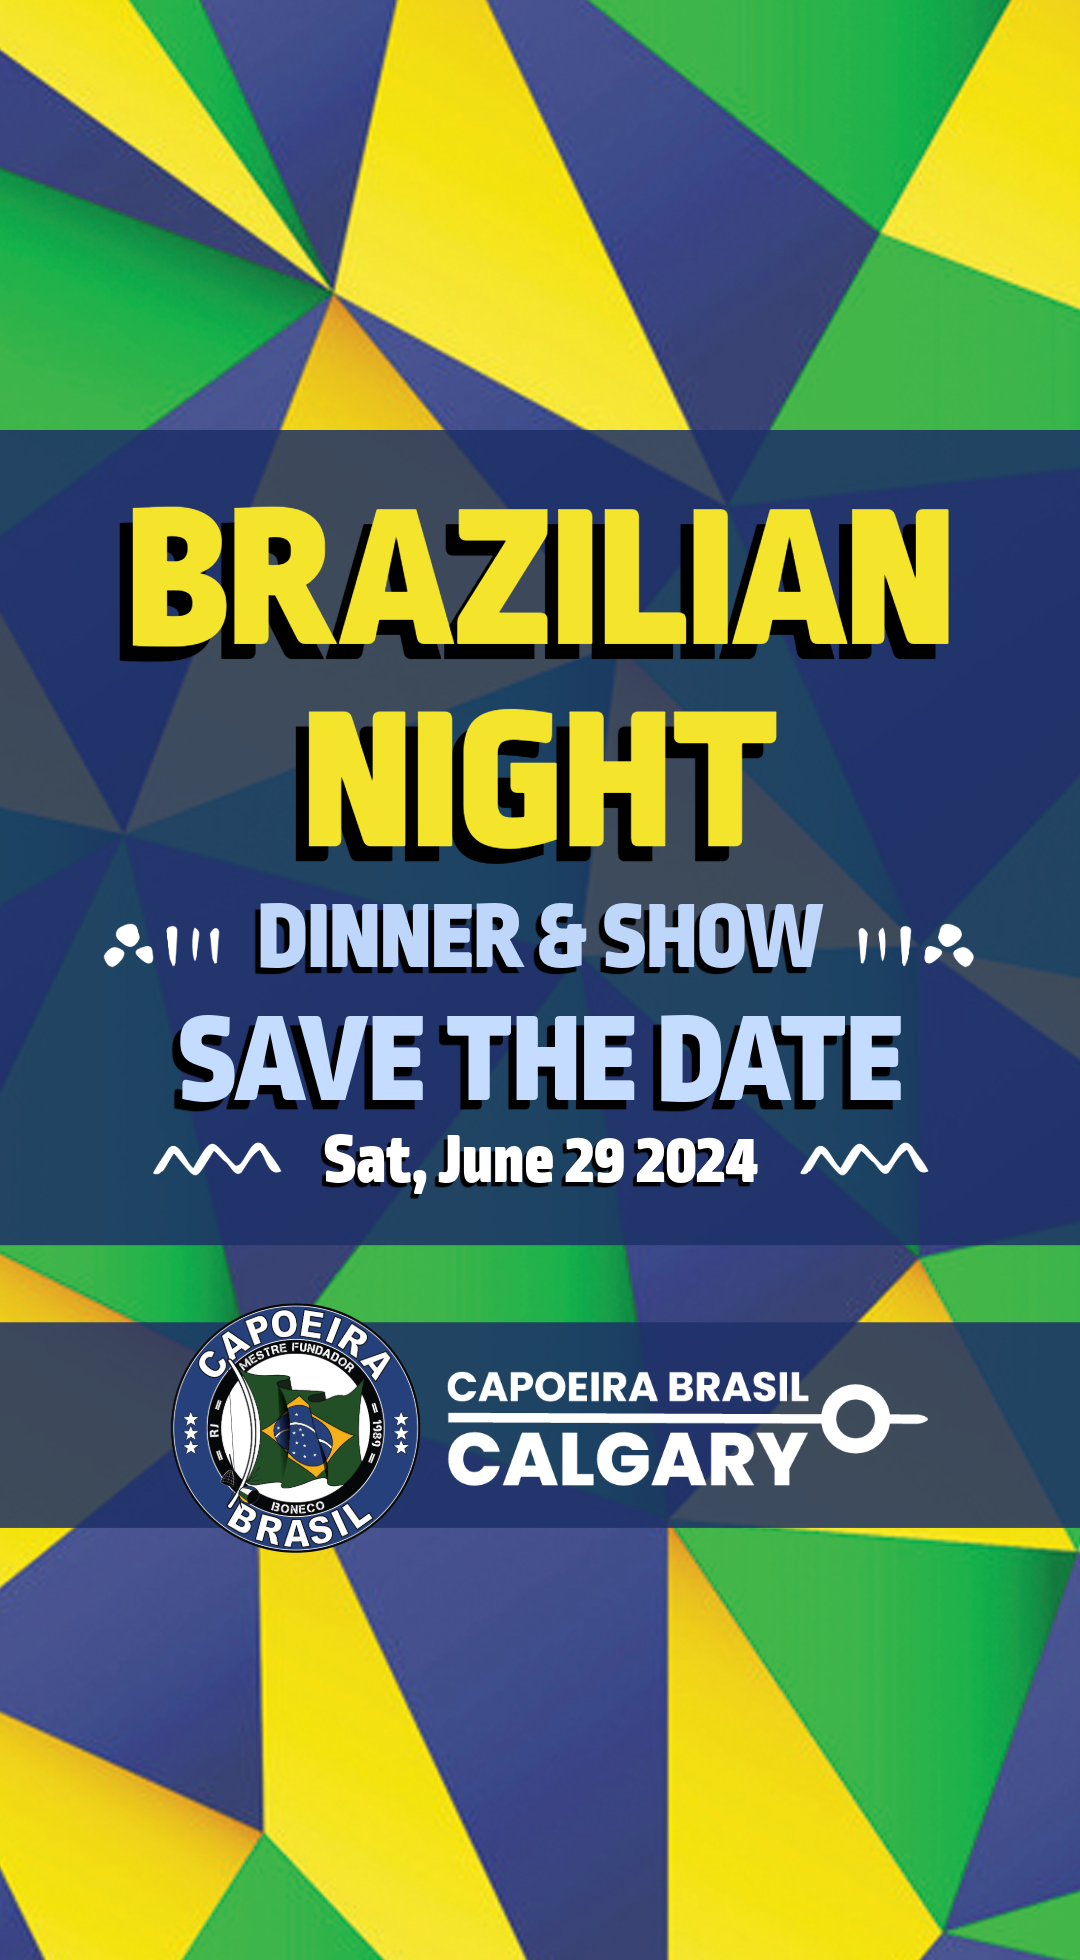 Brazilian Night Save the Date Poster